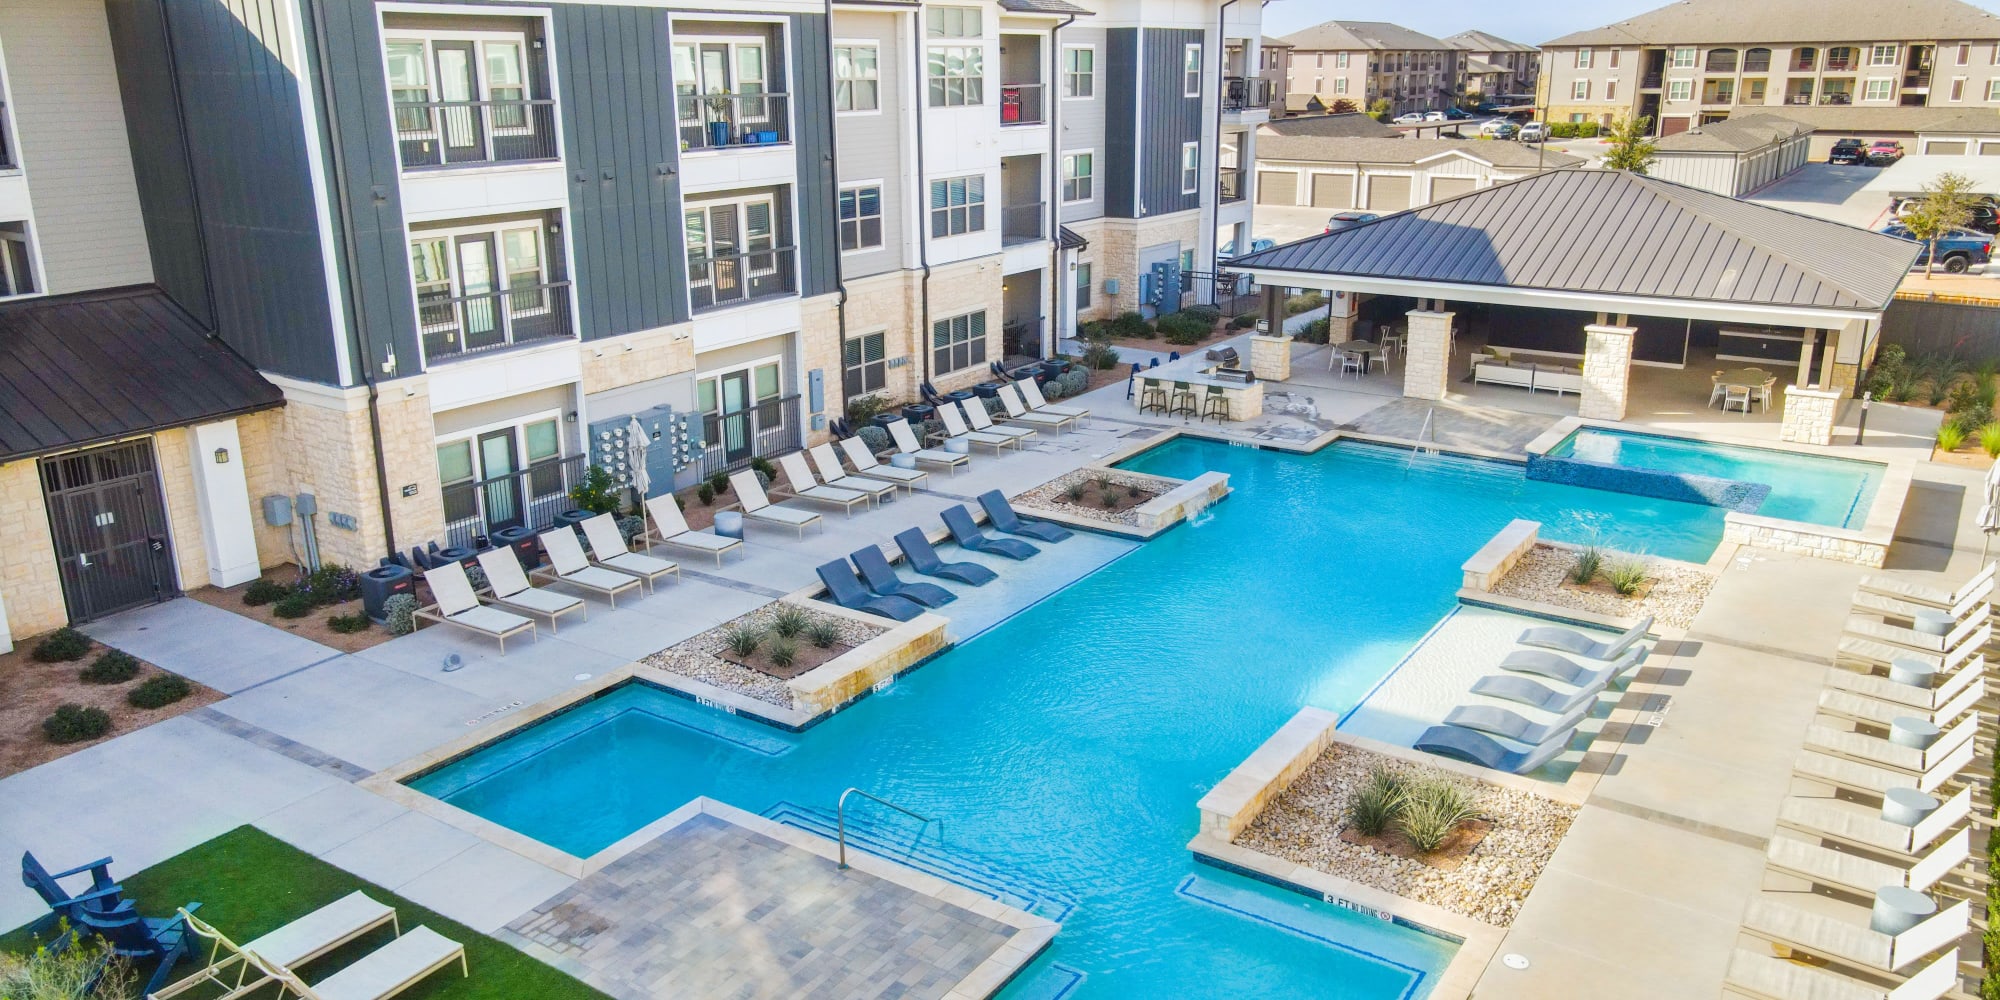 Aerial view of the swimming pool with seating at The Everett at Ally Village in Midland, Texas